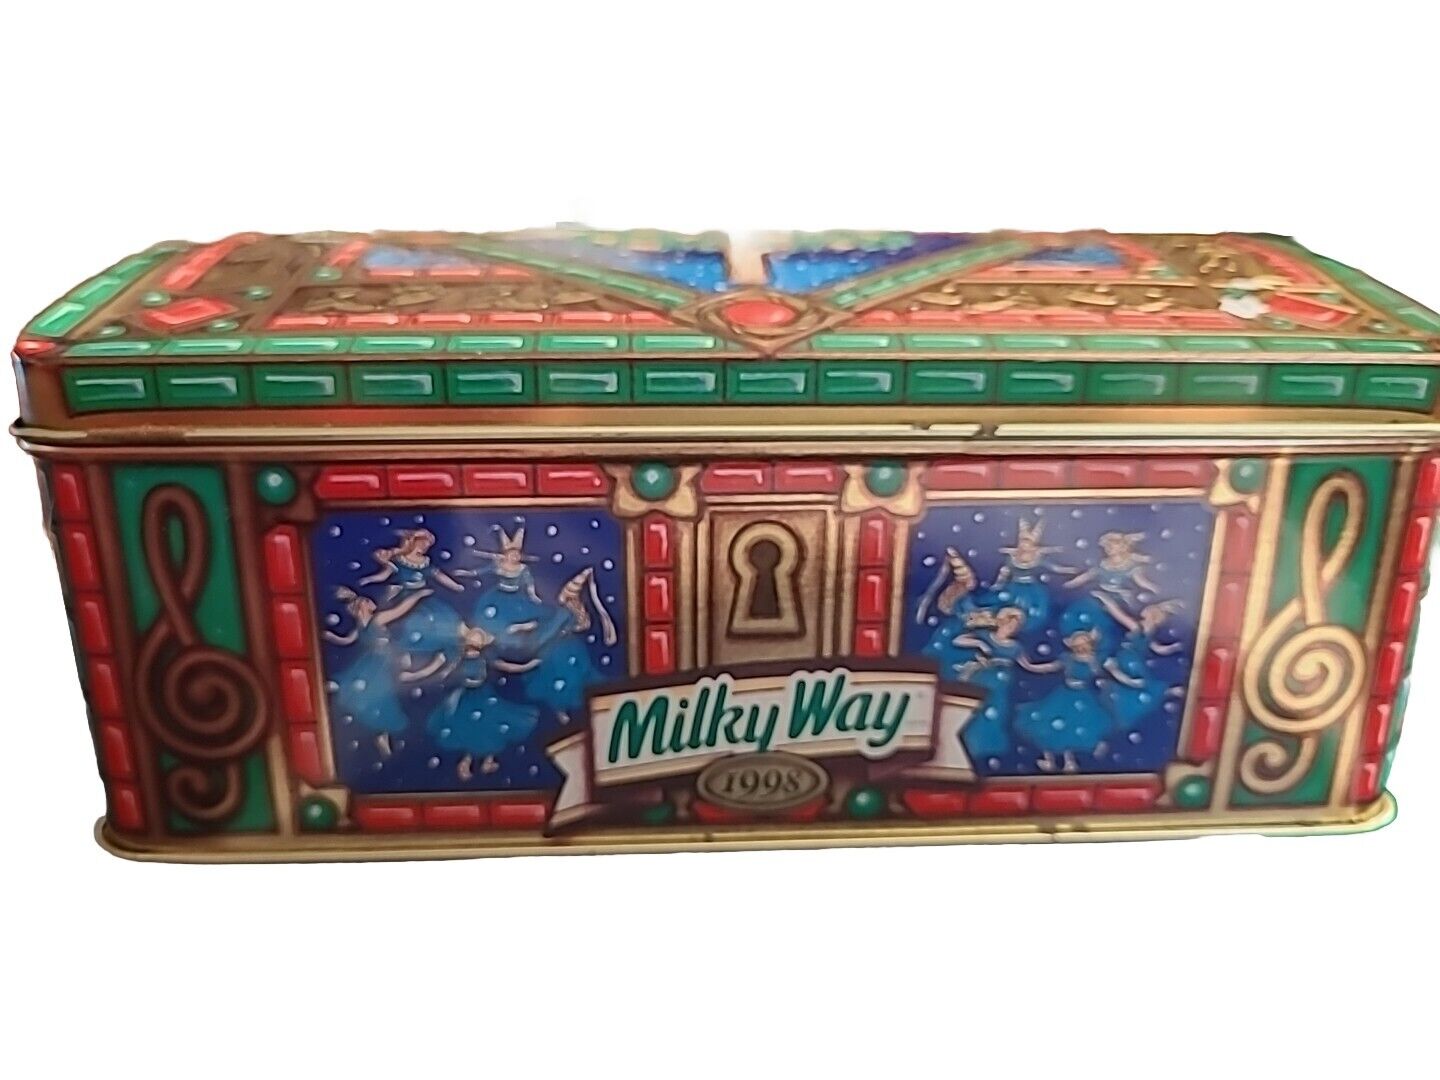 Vintage 1998 Milky Way Holiday Tin Twelve Days of Christmas Limited Edition 8x5